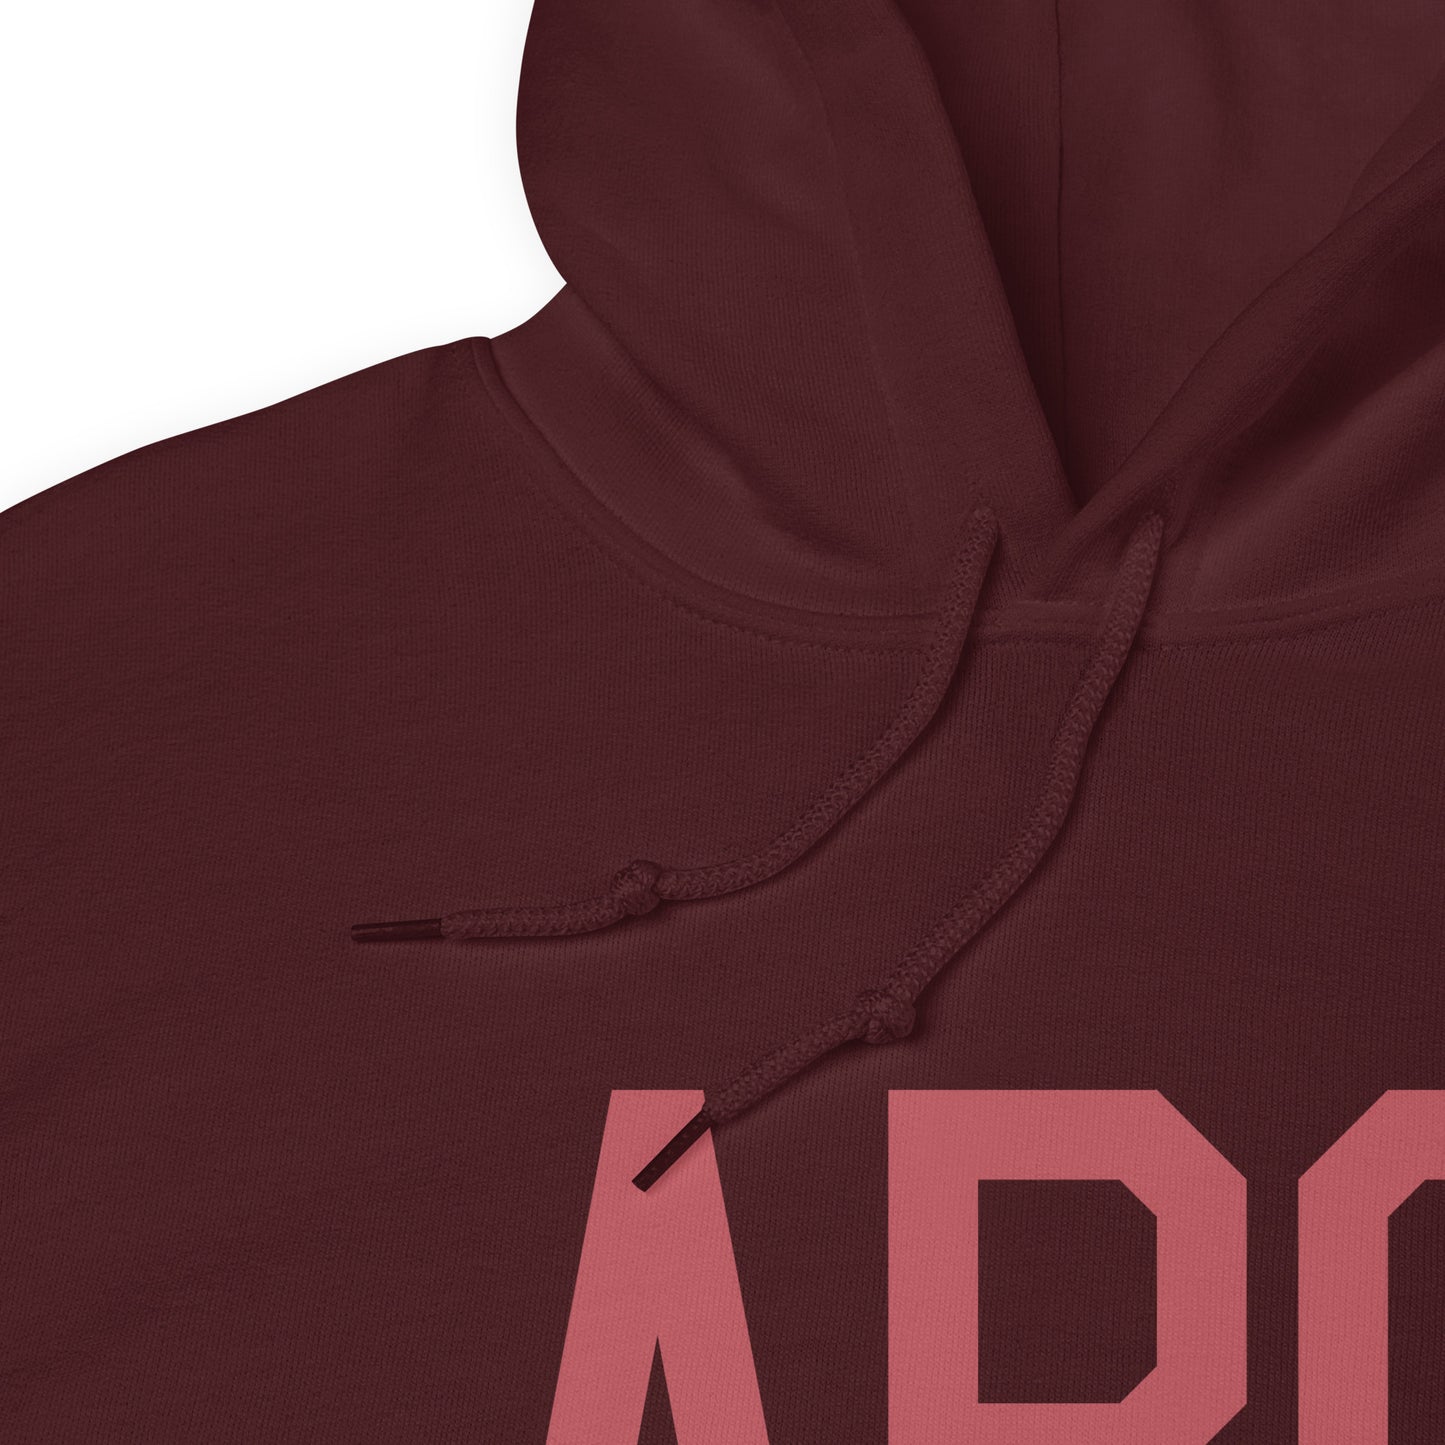 Aviation Enthusiast Hoodie - Deep Pink Graphic • ABQ Albuquerque • YHM Designs - Image 10